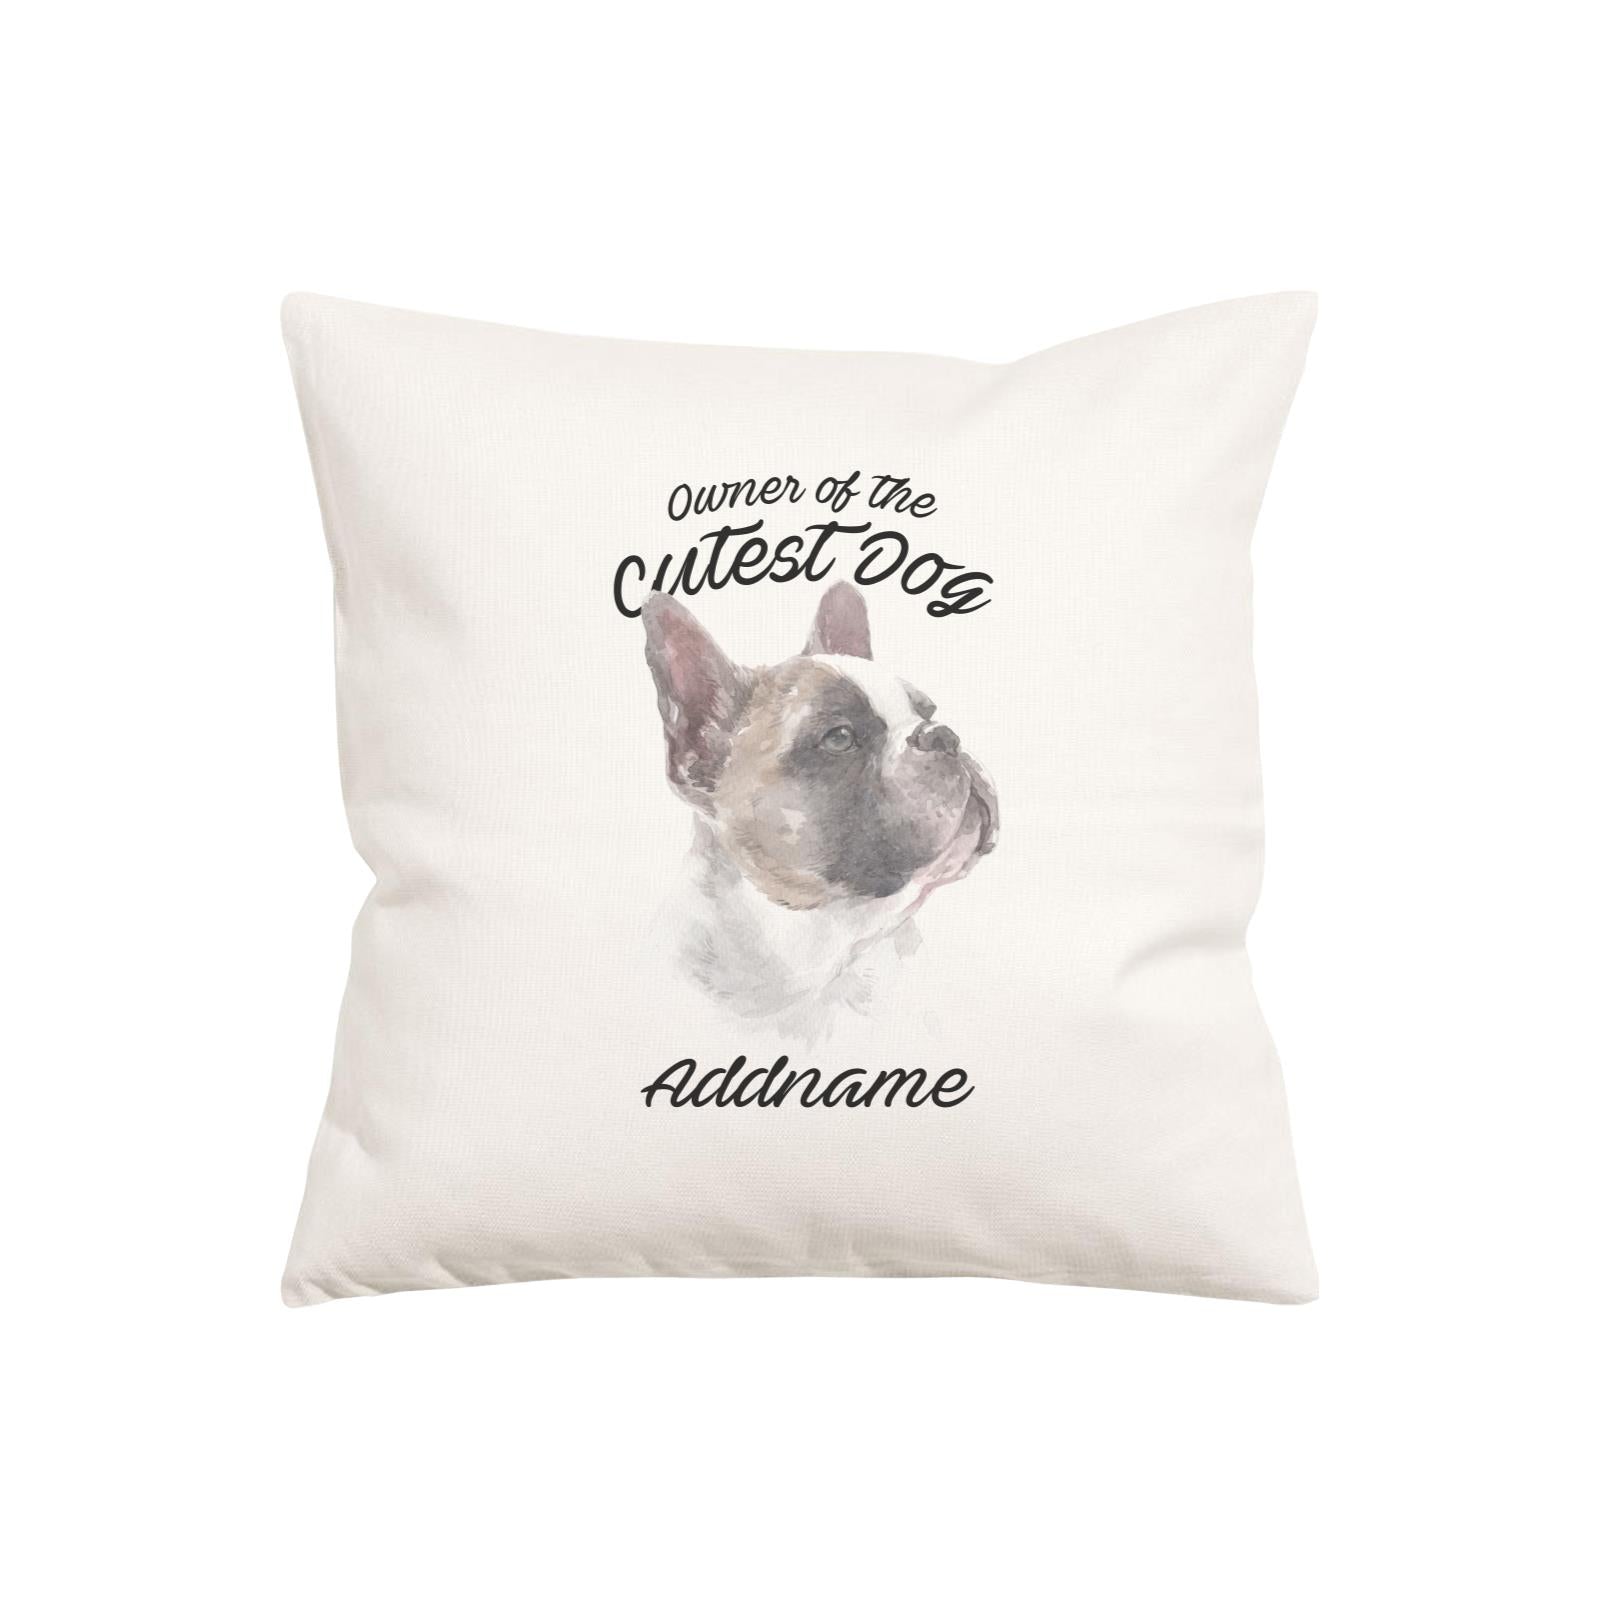 Watercolor Dog Owner Of The Cutest Dog French Bulldog Addname Pillow Cushion